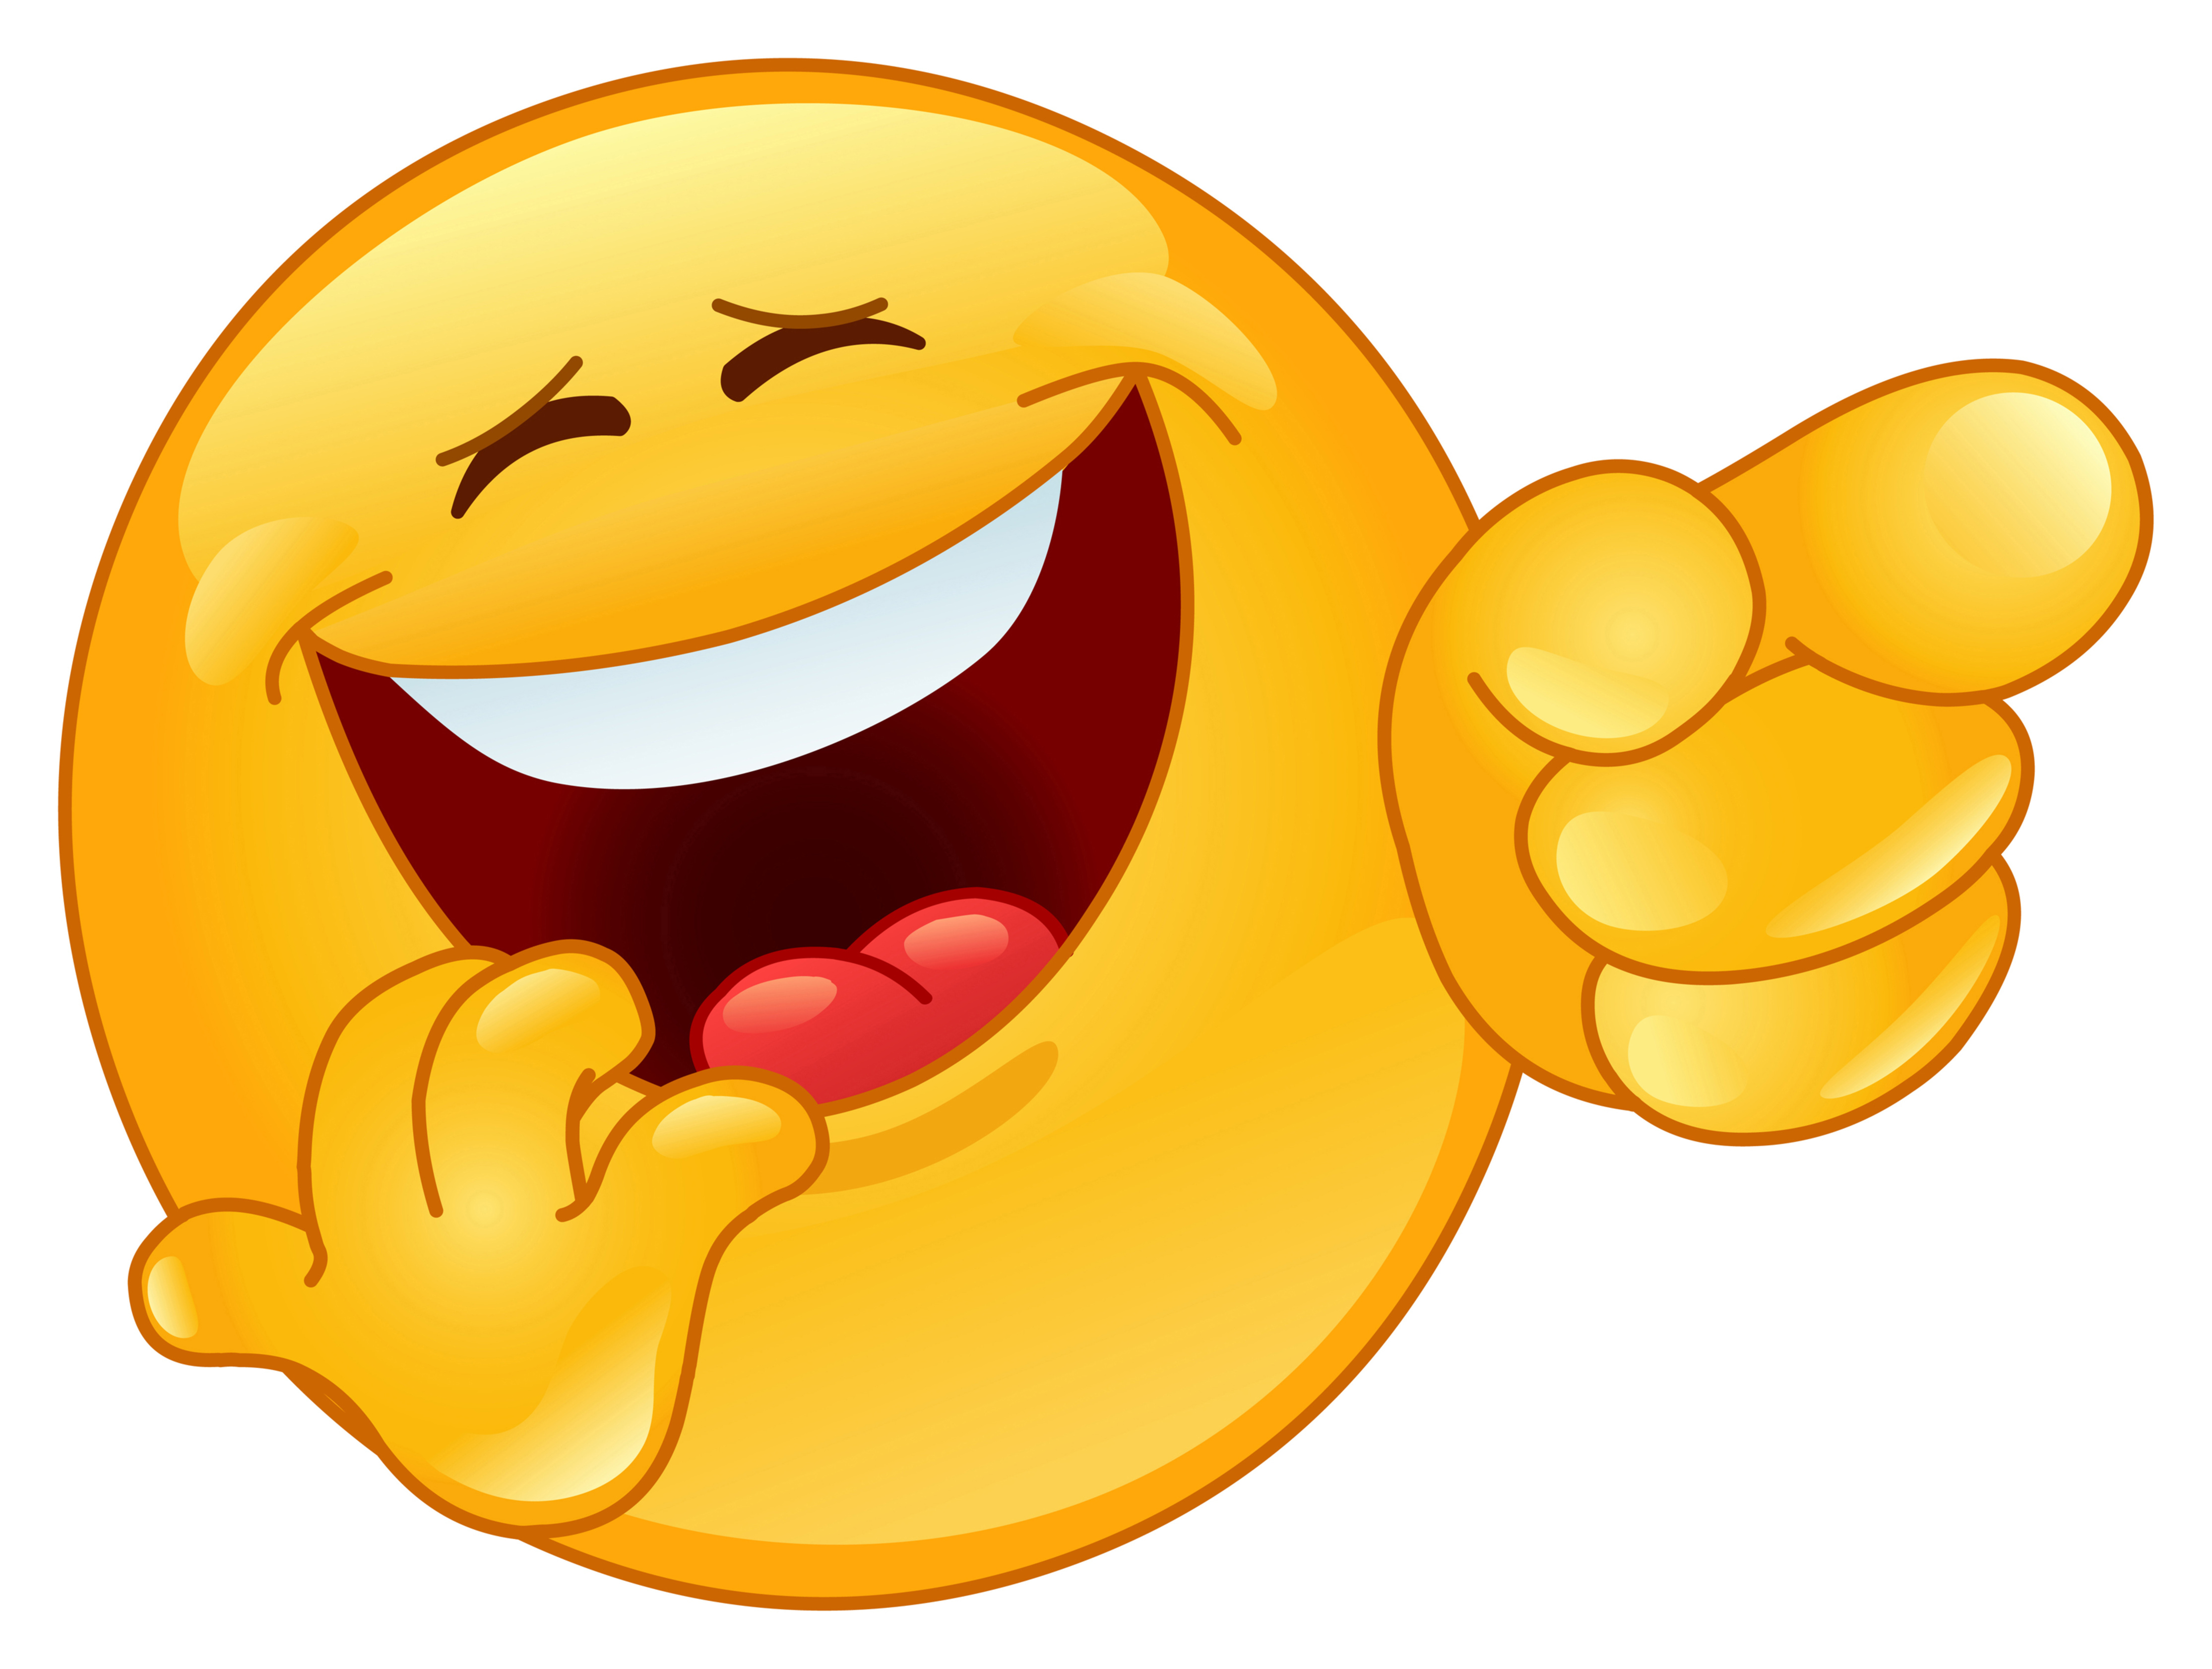 Animated Smileys Laughing - ClipArt Best